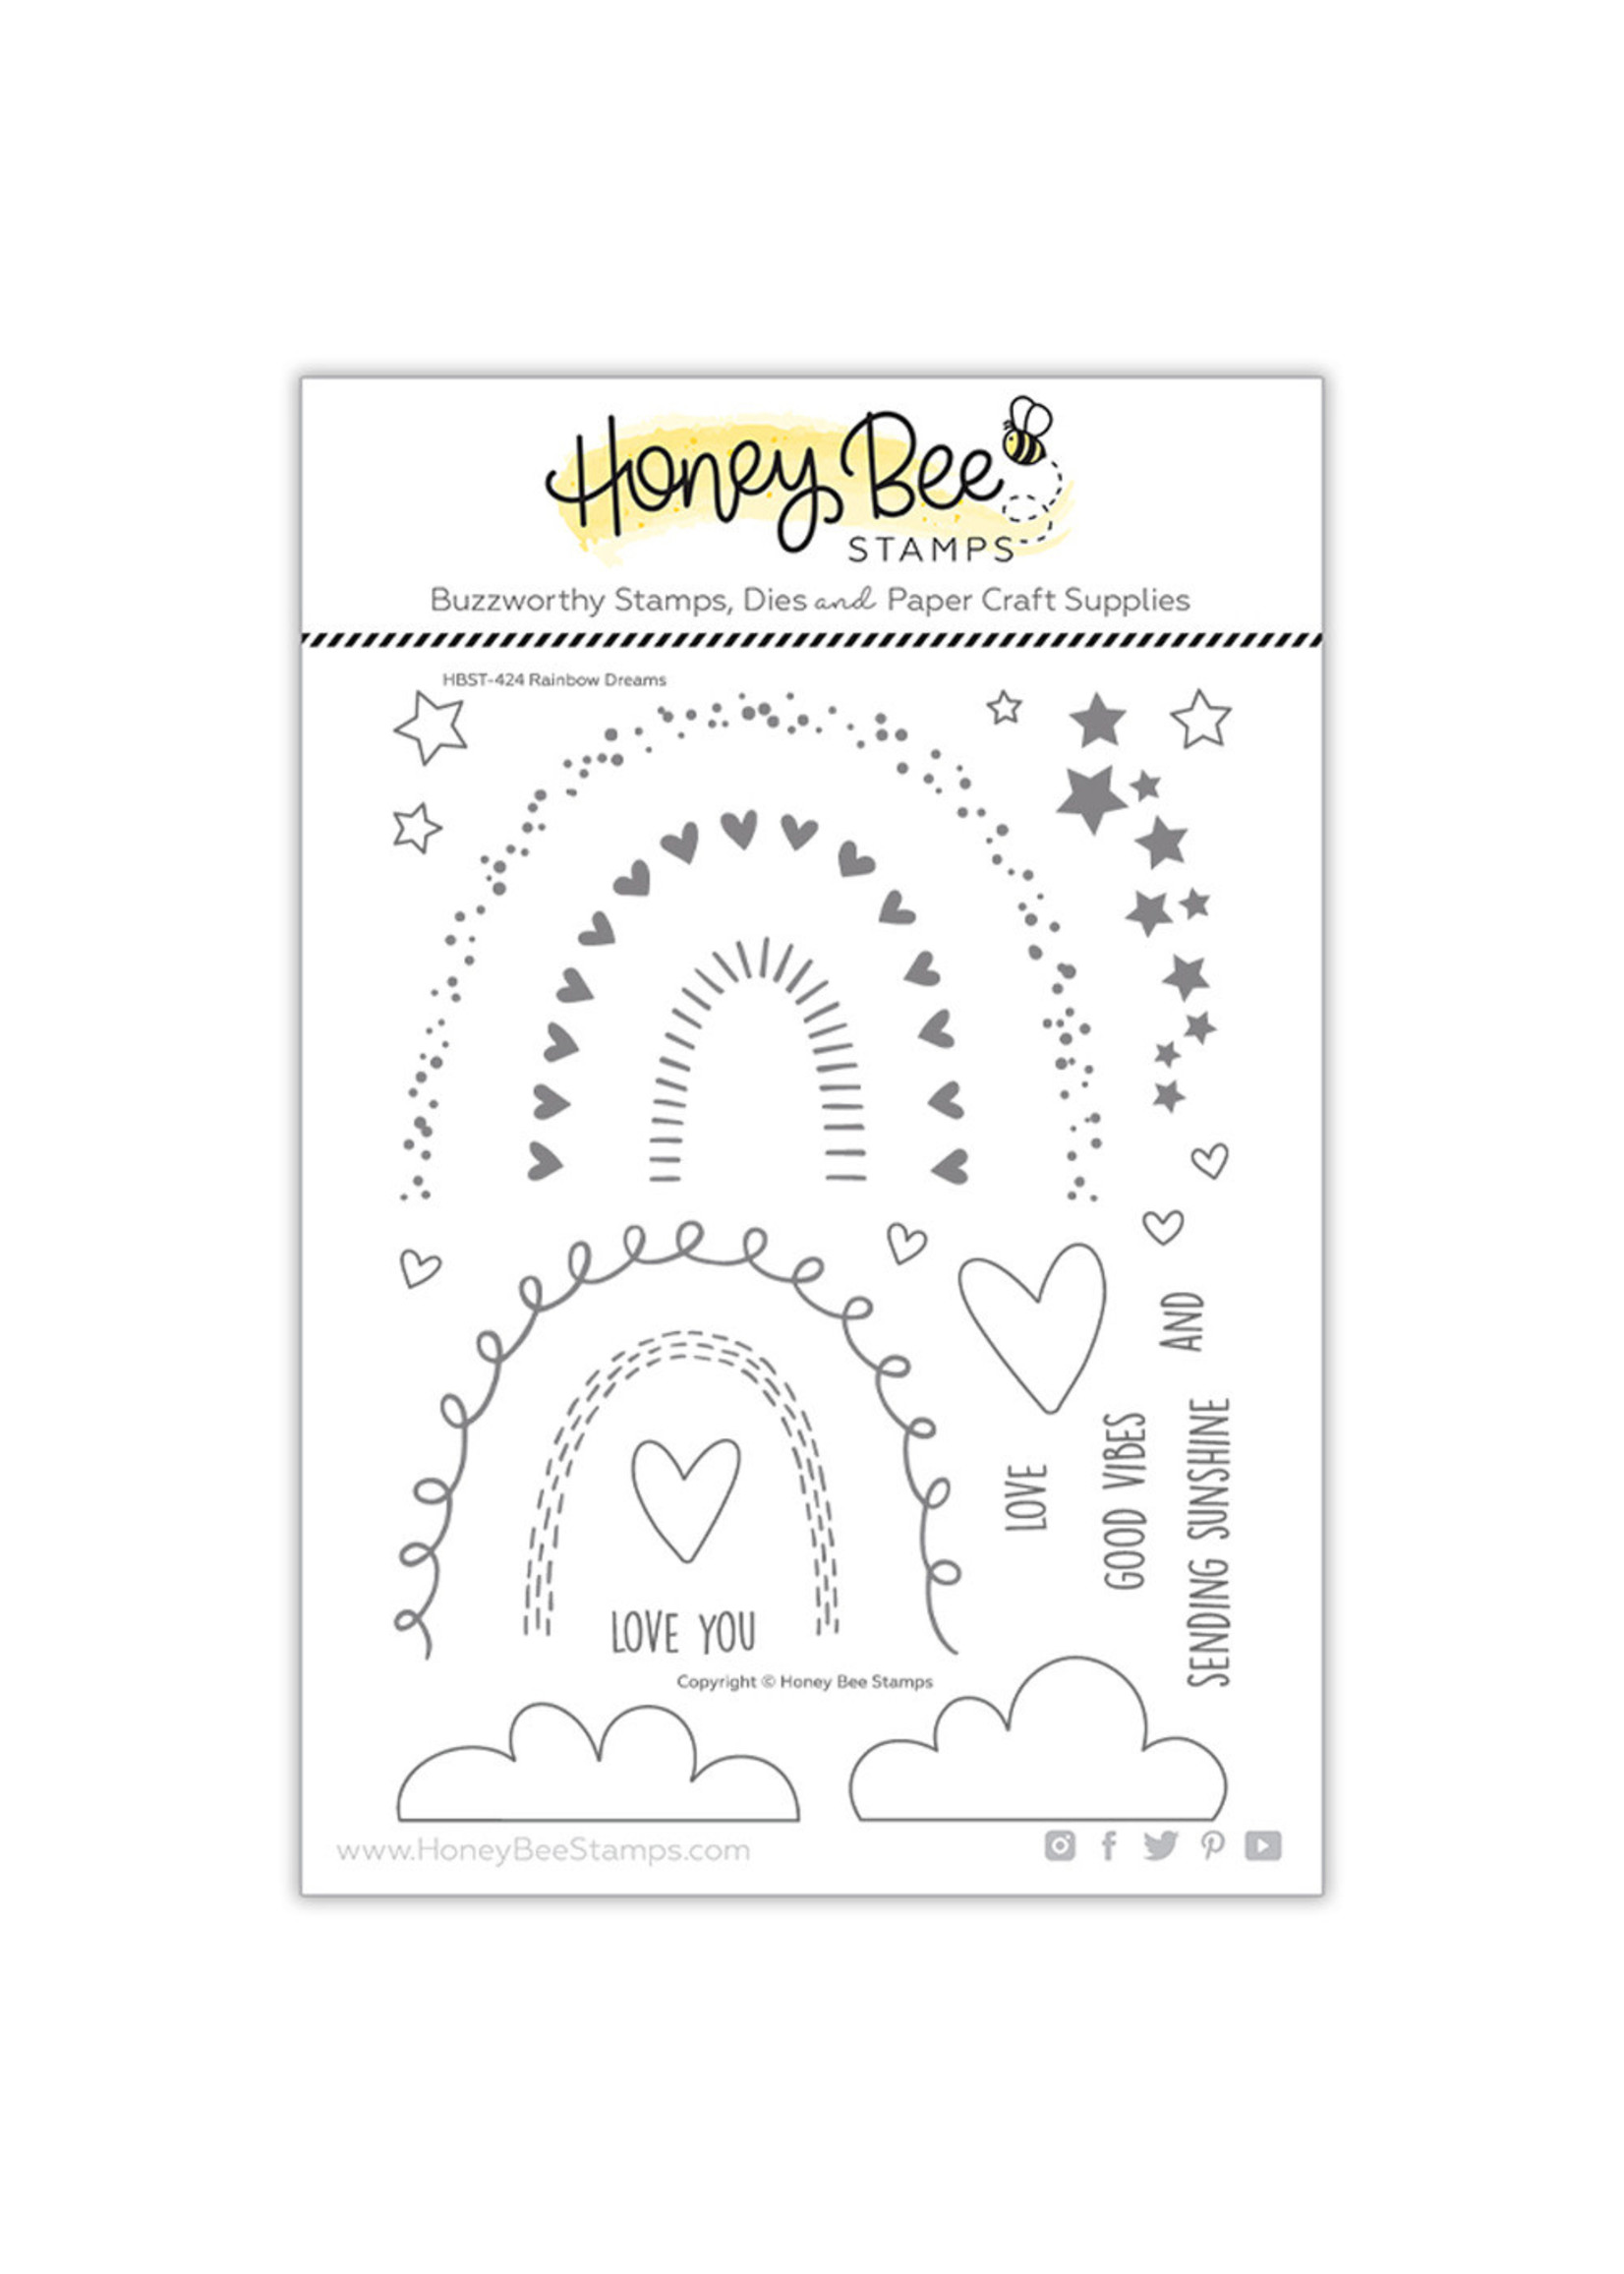 Honey Bee Stamps Rainbow Dreams Stamps